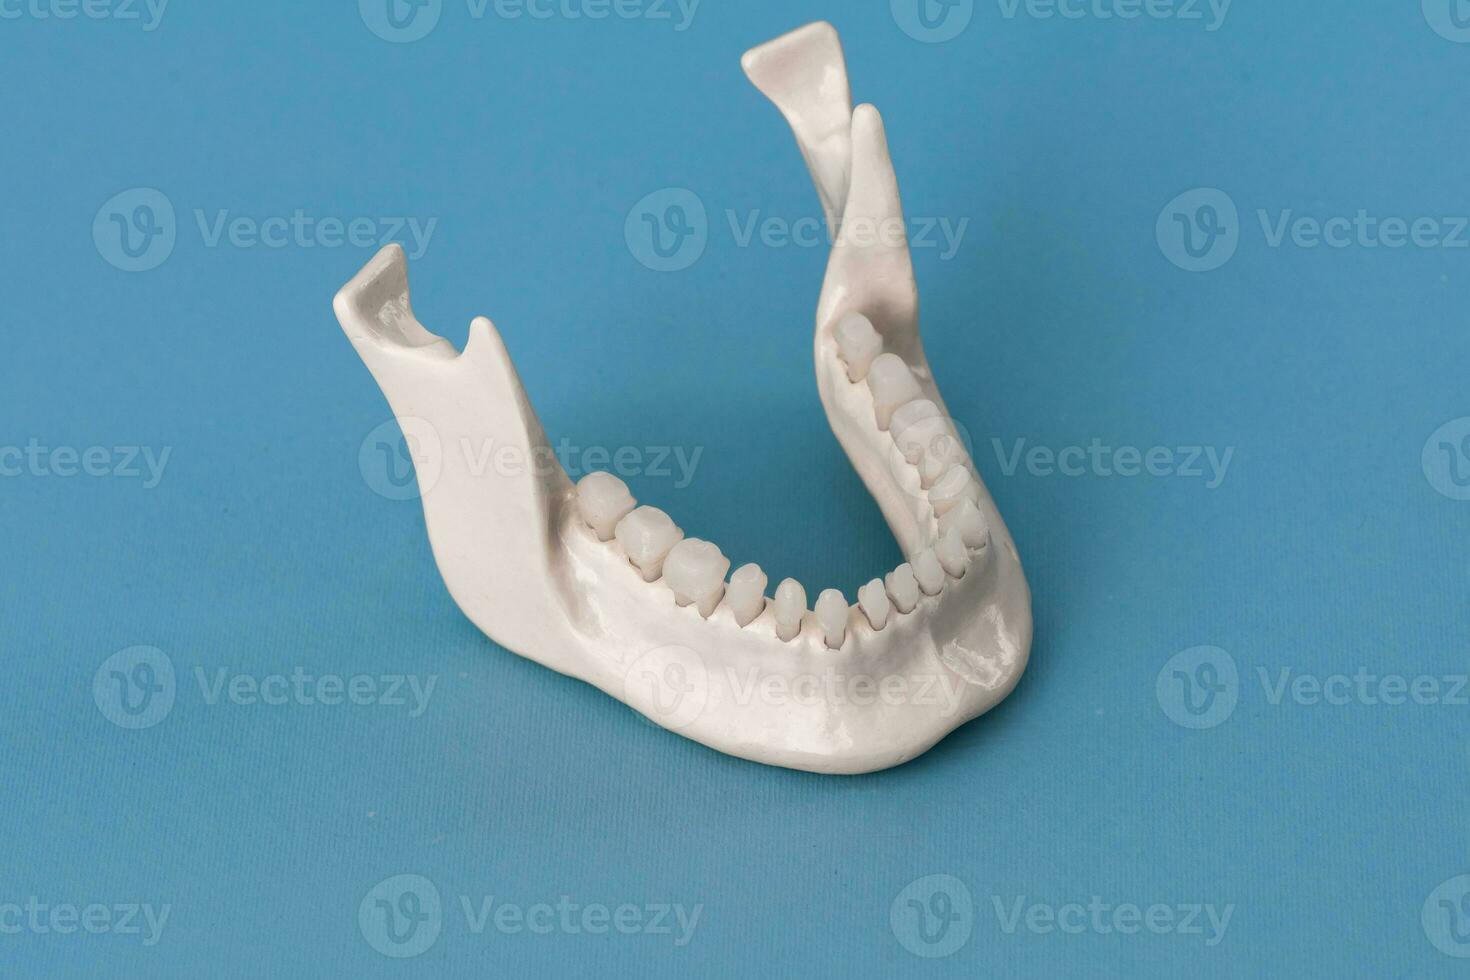 Lower human jaw with teeth anatomy model isolated on blue background. Healthy teeth, dental care and orthodontic medical concept. photo